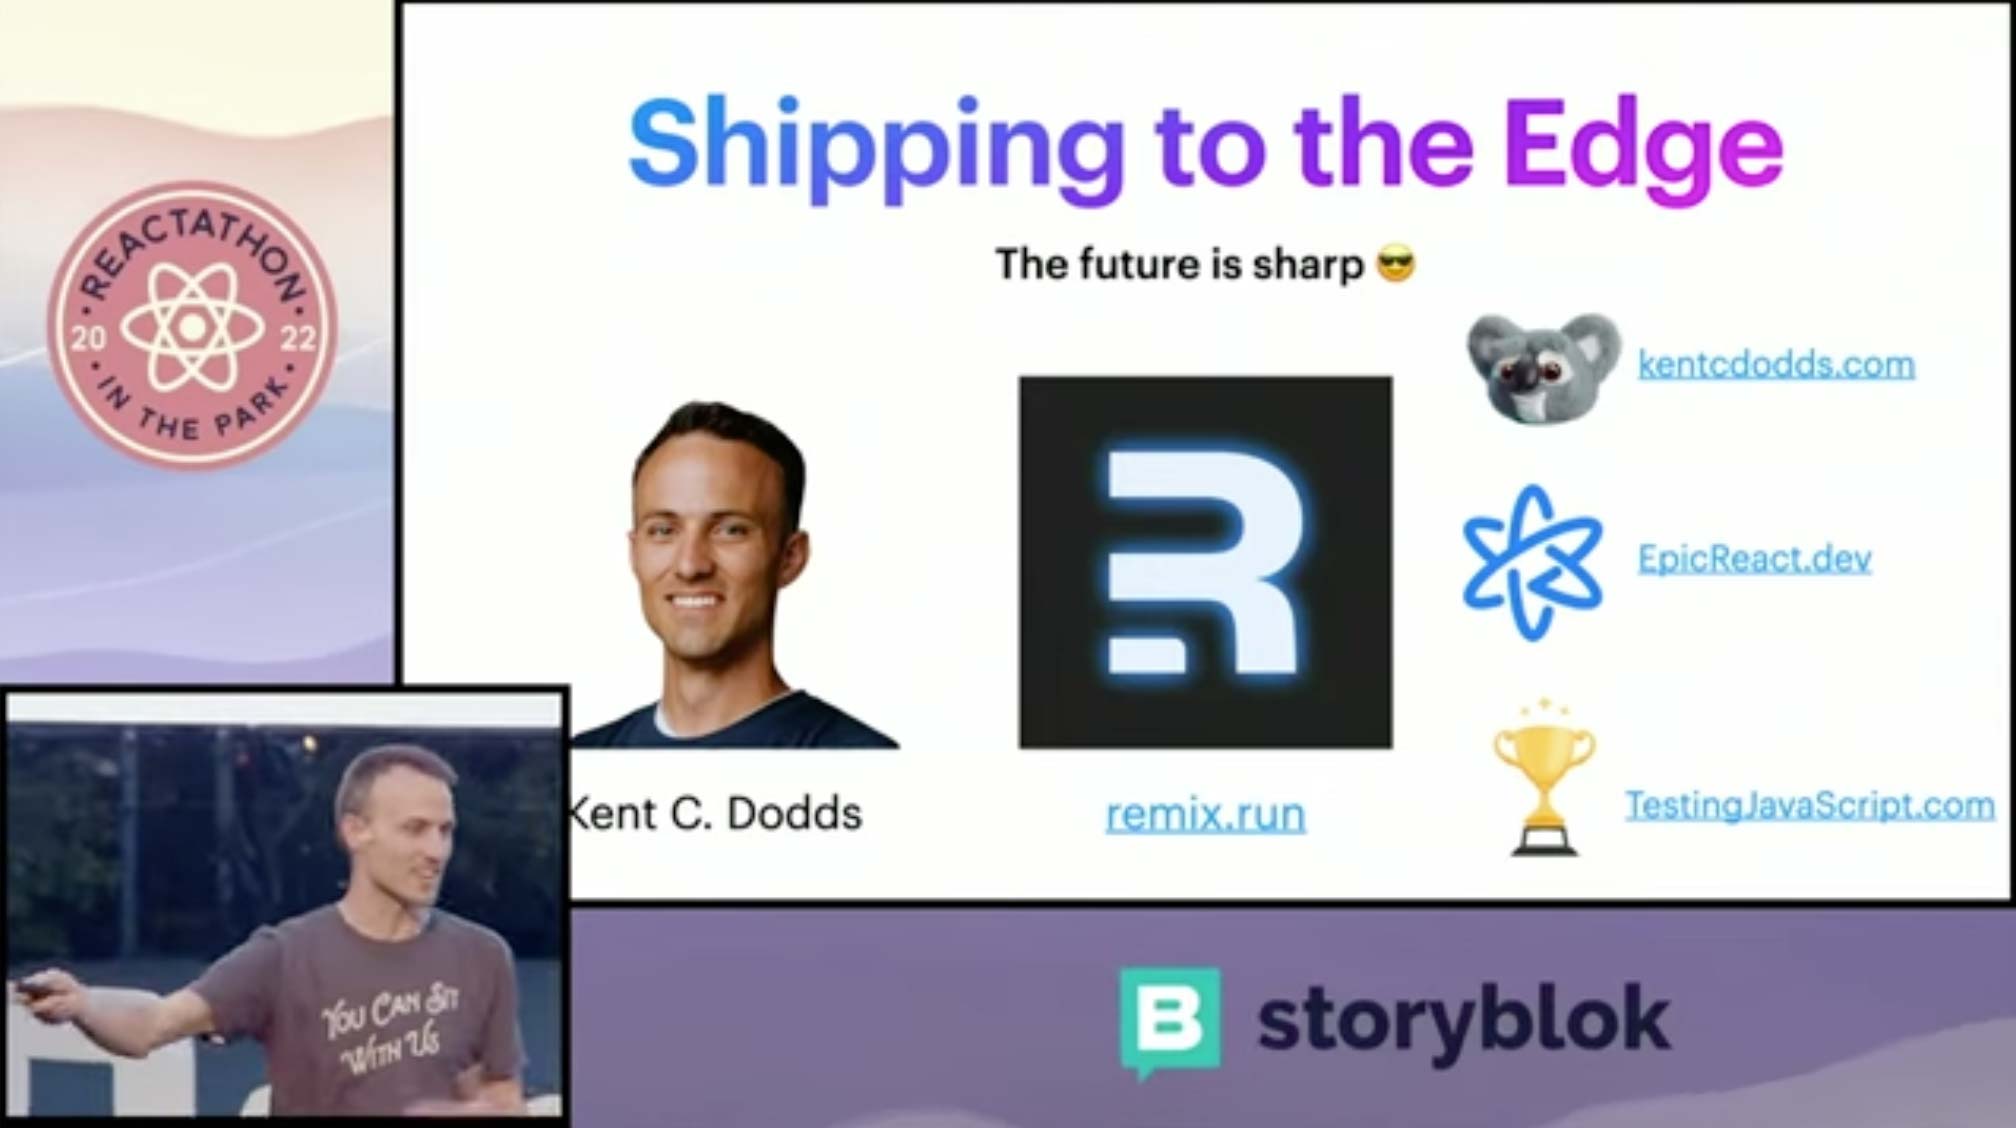 Screenshot from the video Kent’s talk, showing Kent and his title slide with the words “Shipping to the Edge”